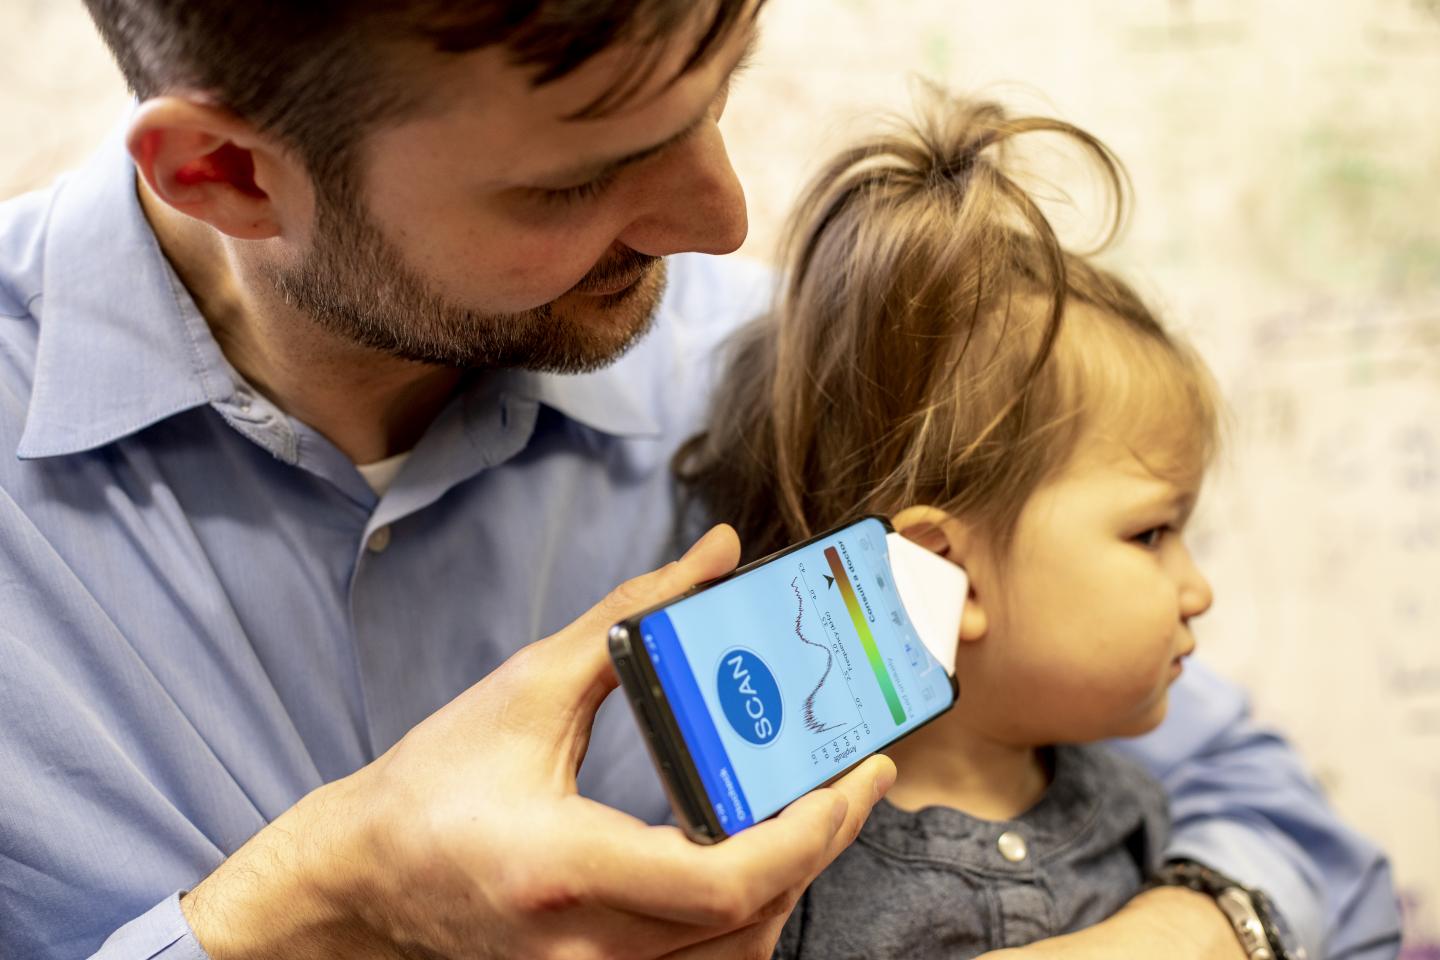 User-Friendly Smartphone Platform Sounds Out Possible Ear Infections in Children (2 of 3)